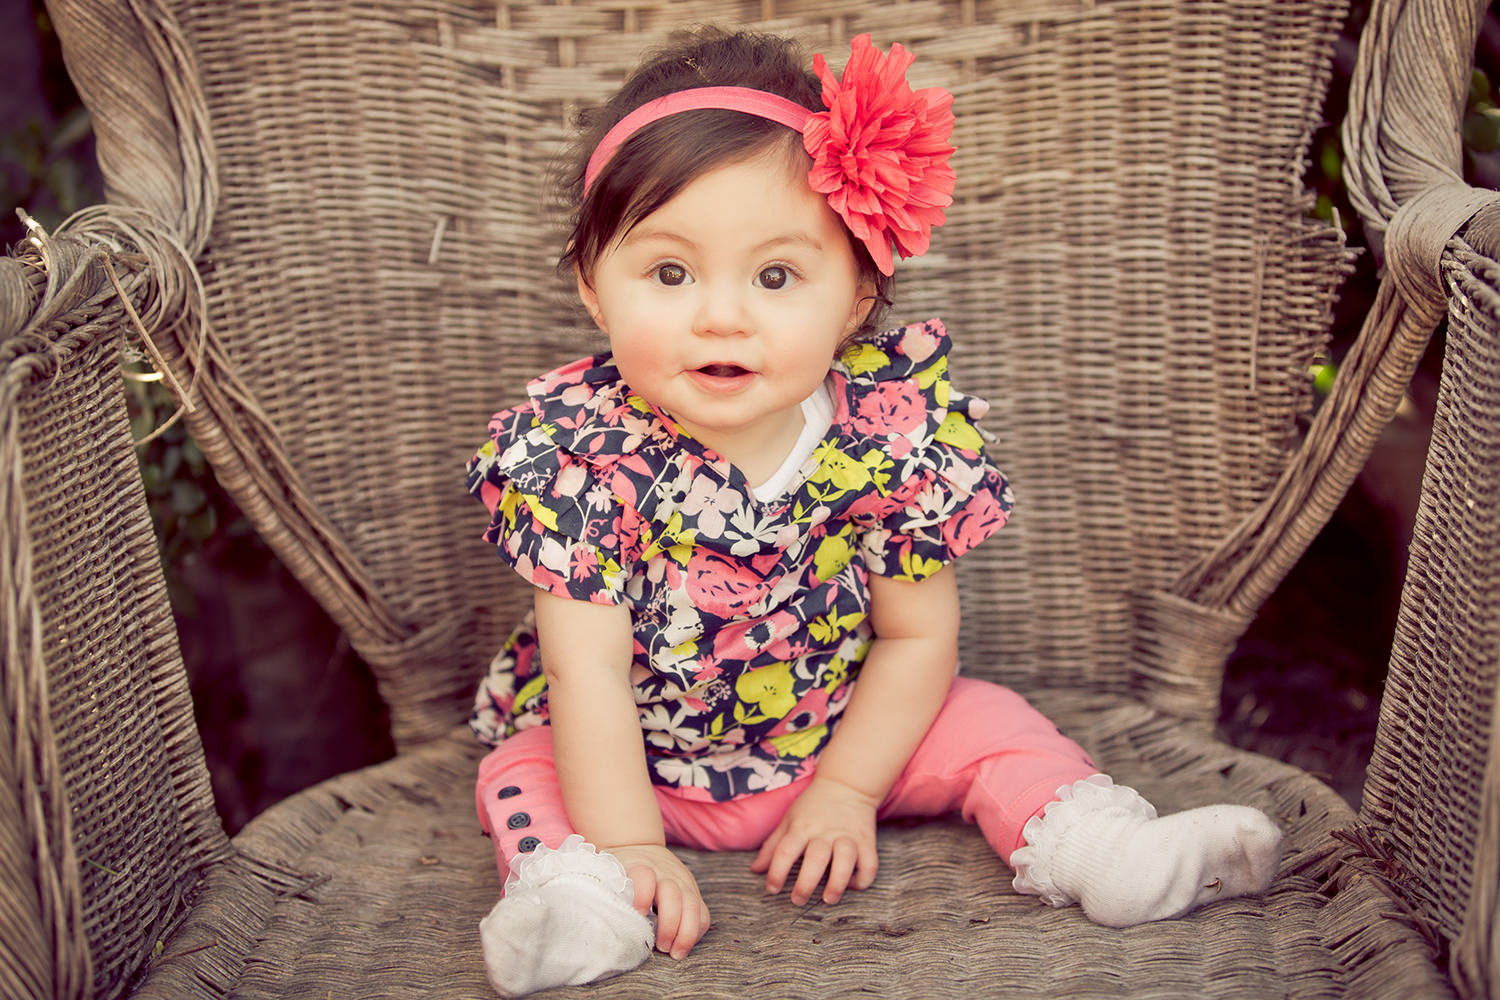 san diego family photography | little girl with wooden chair with cute pnk bow